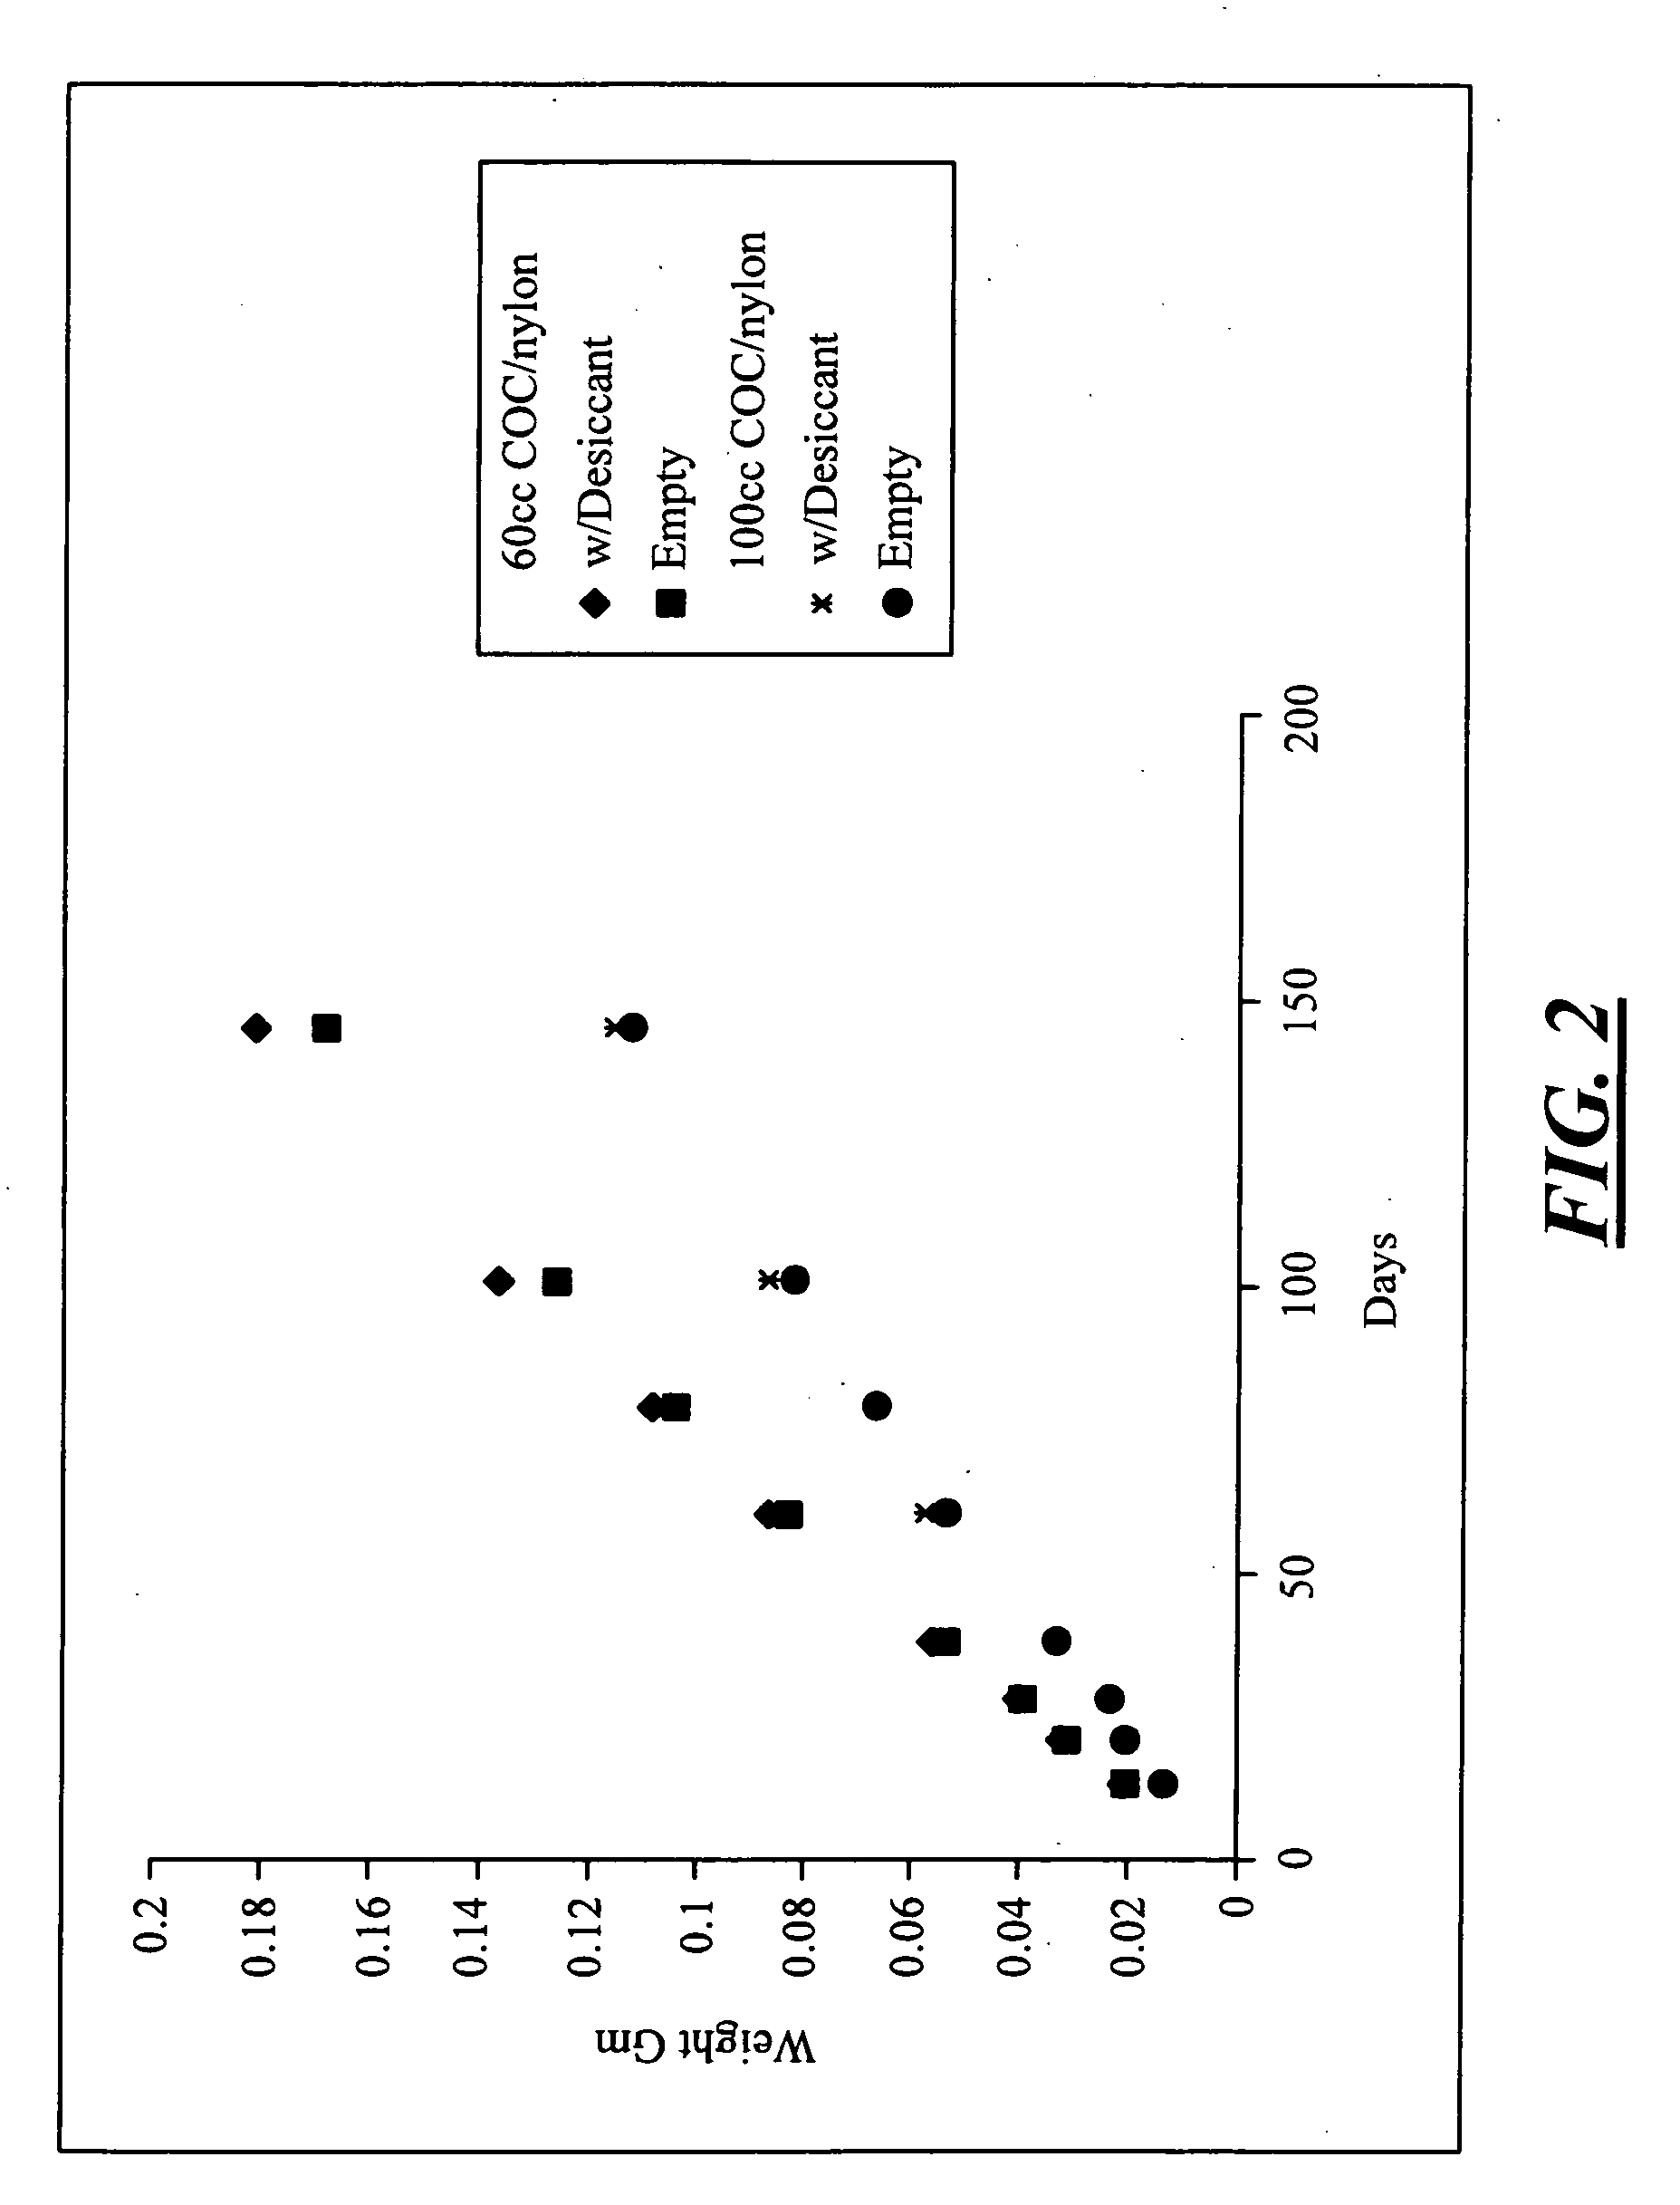 Multilayer plastic container and method of storing lyophilized products